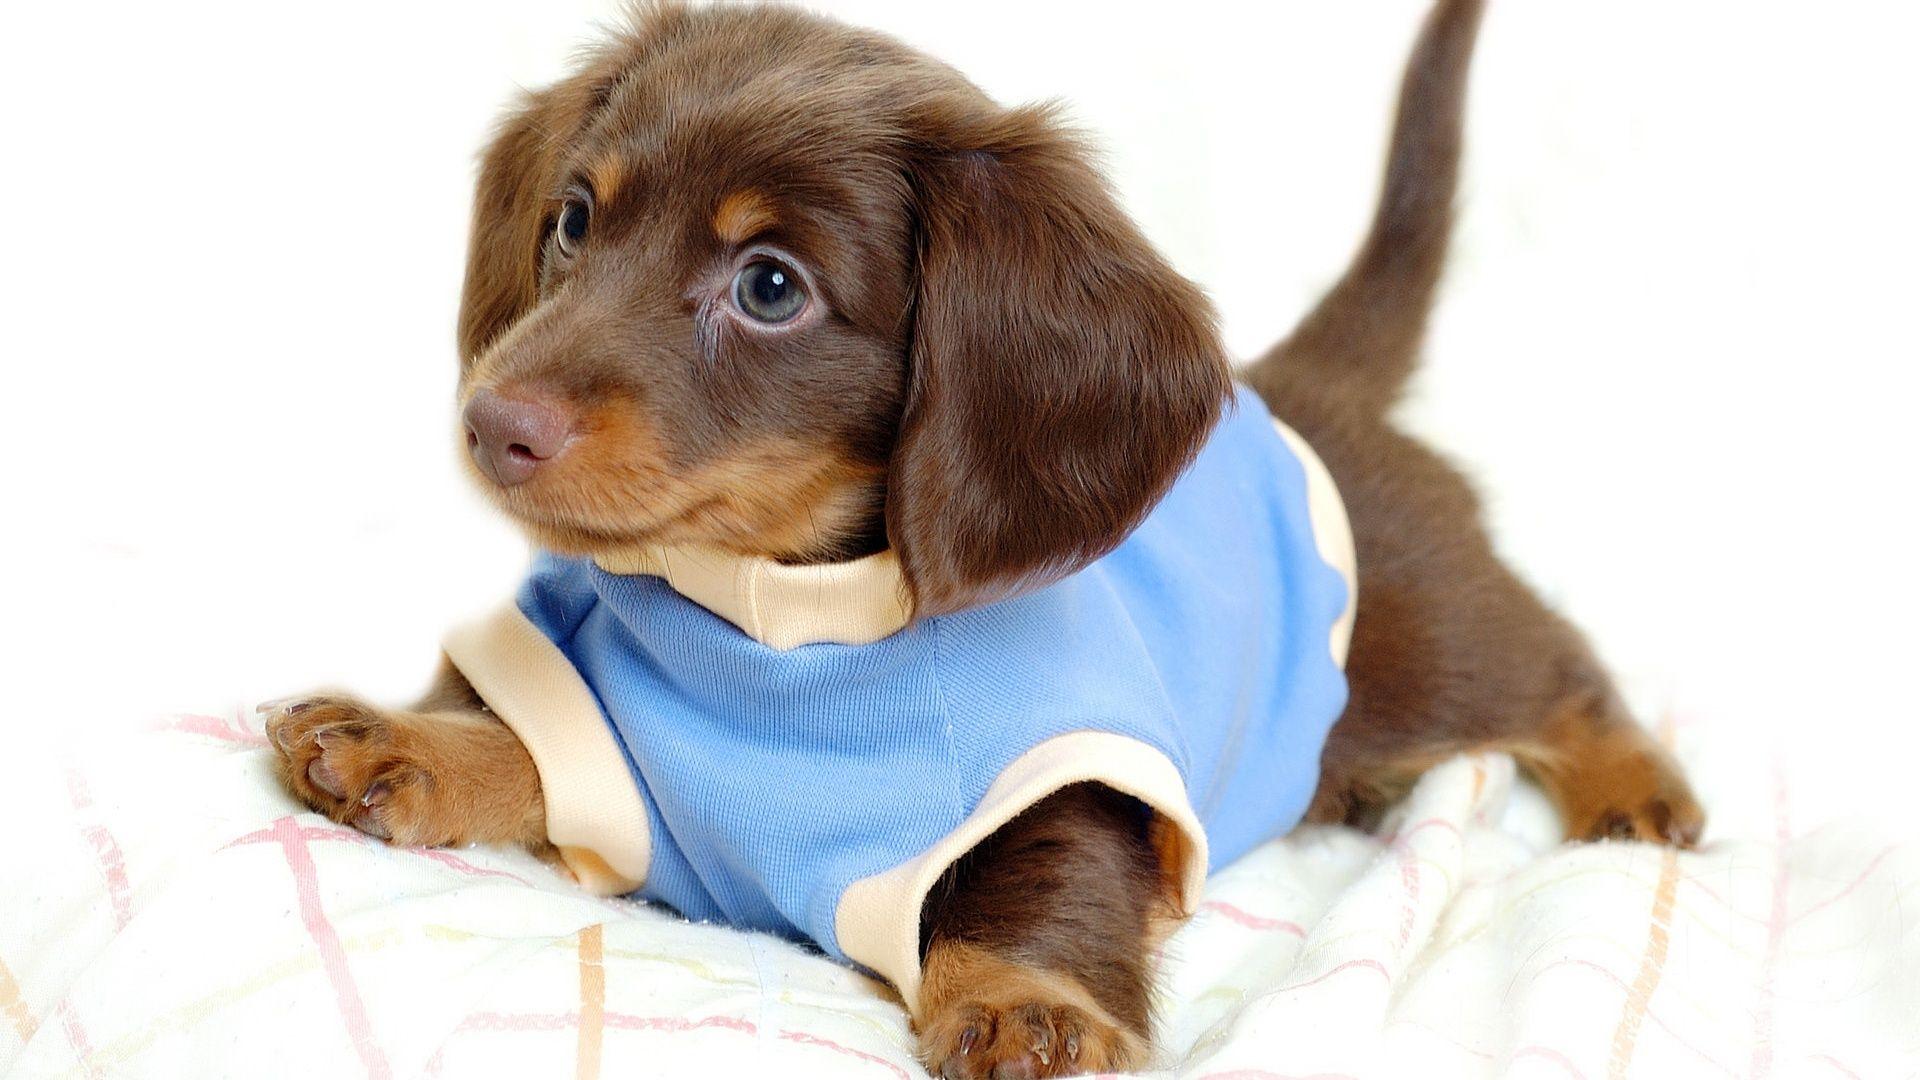 Cute Dog Puppy HD Image for Free